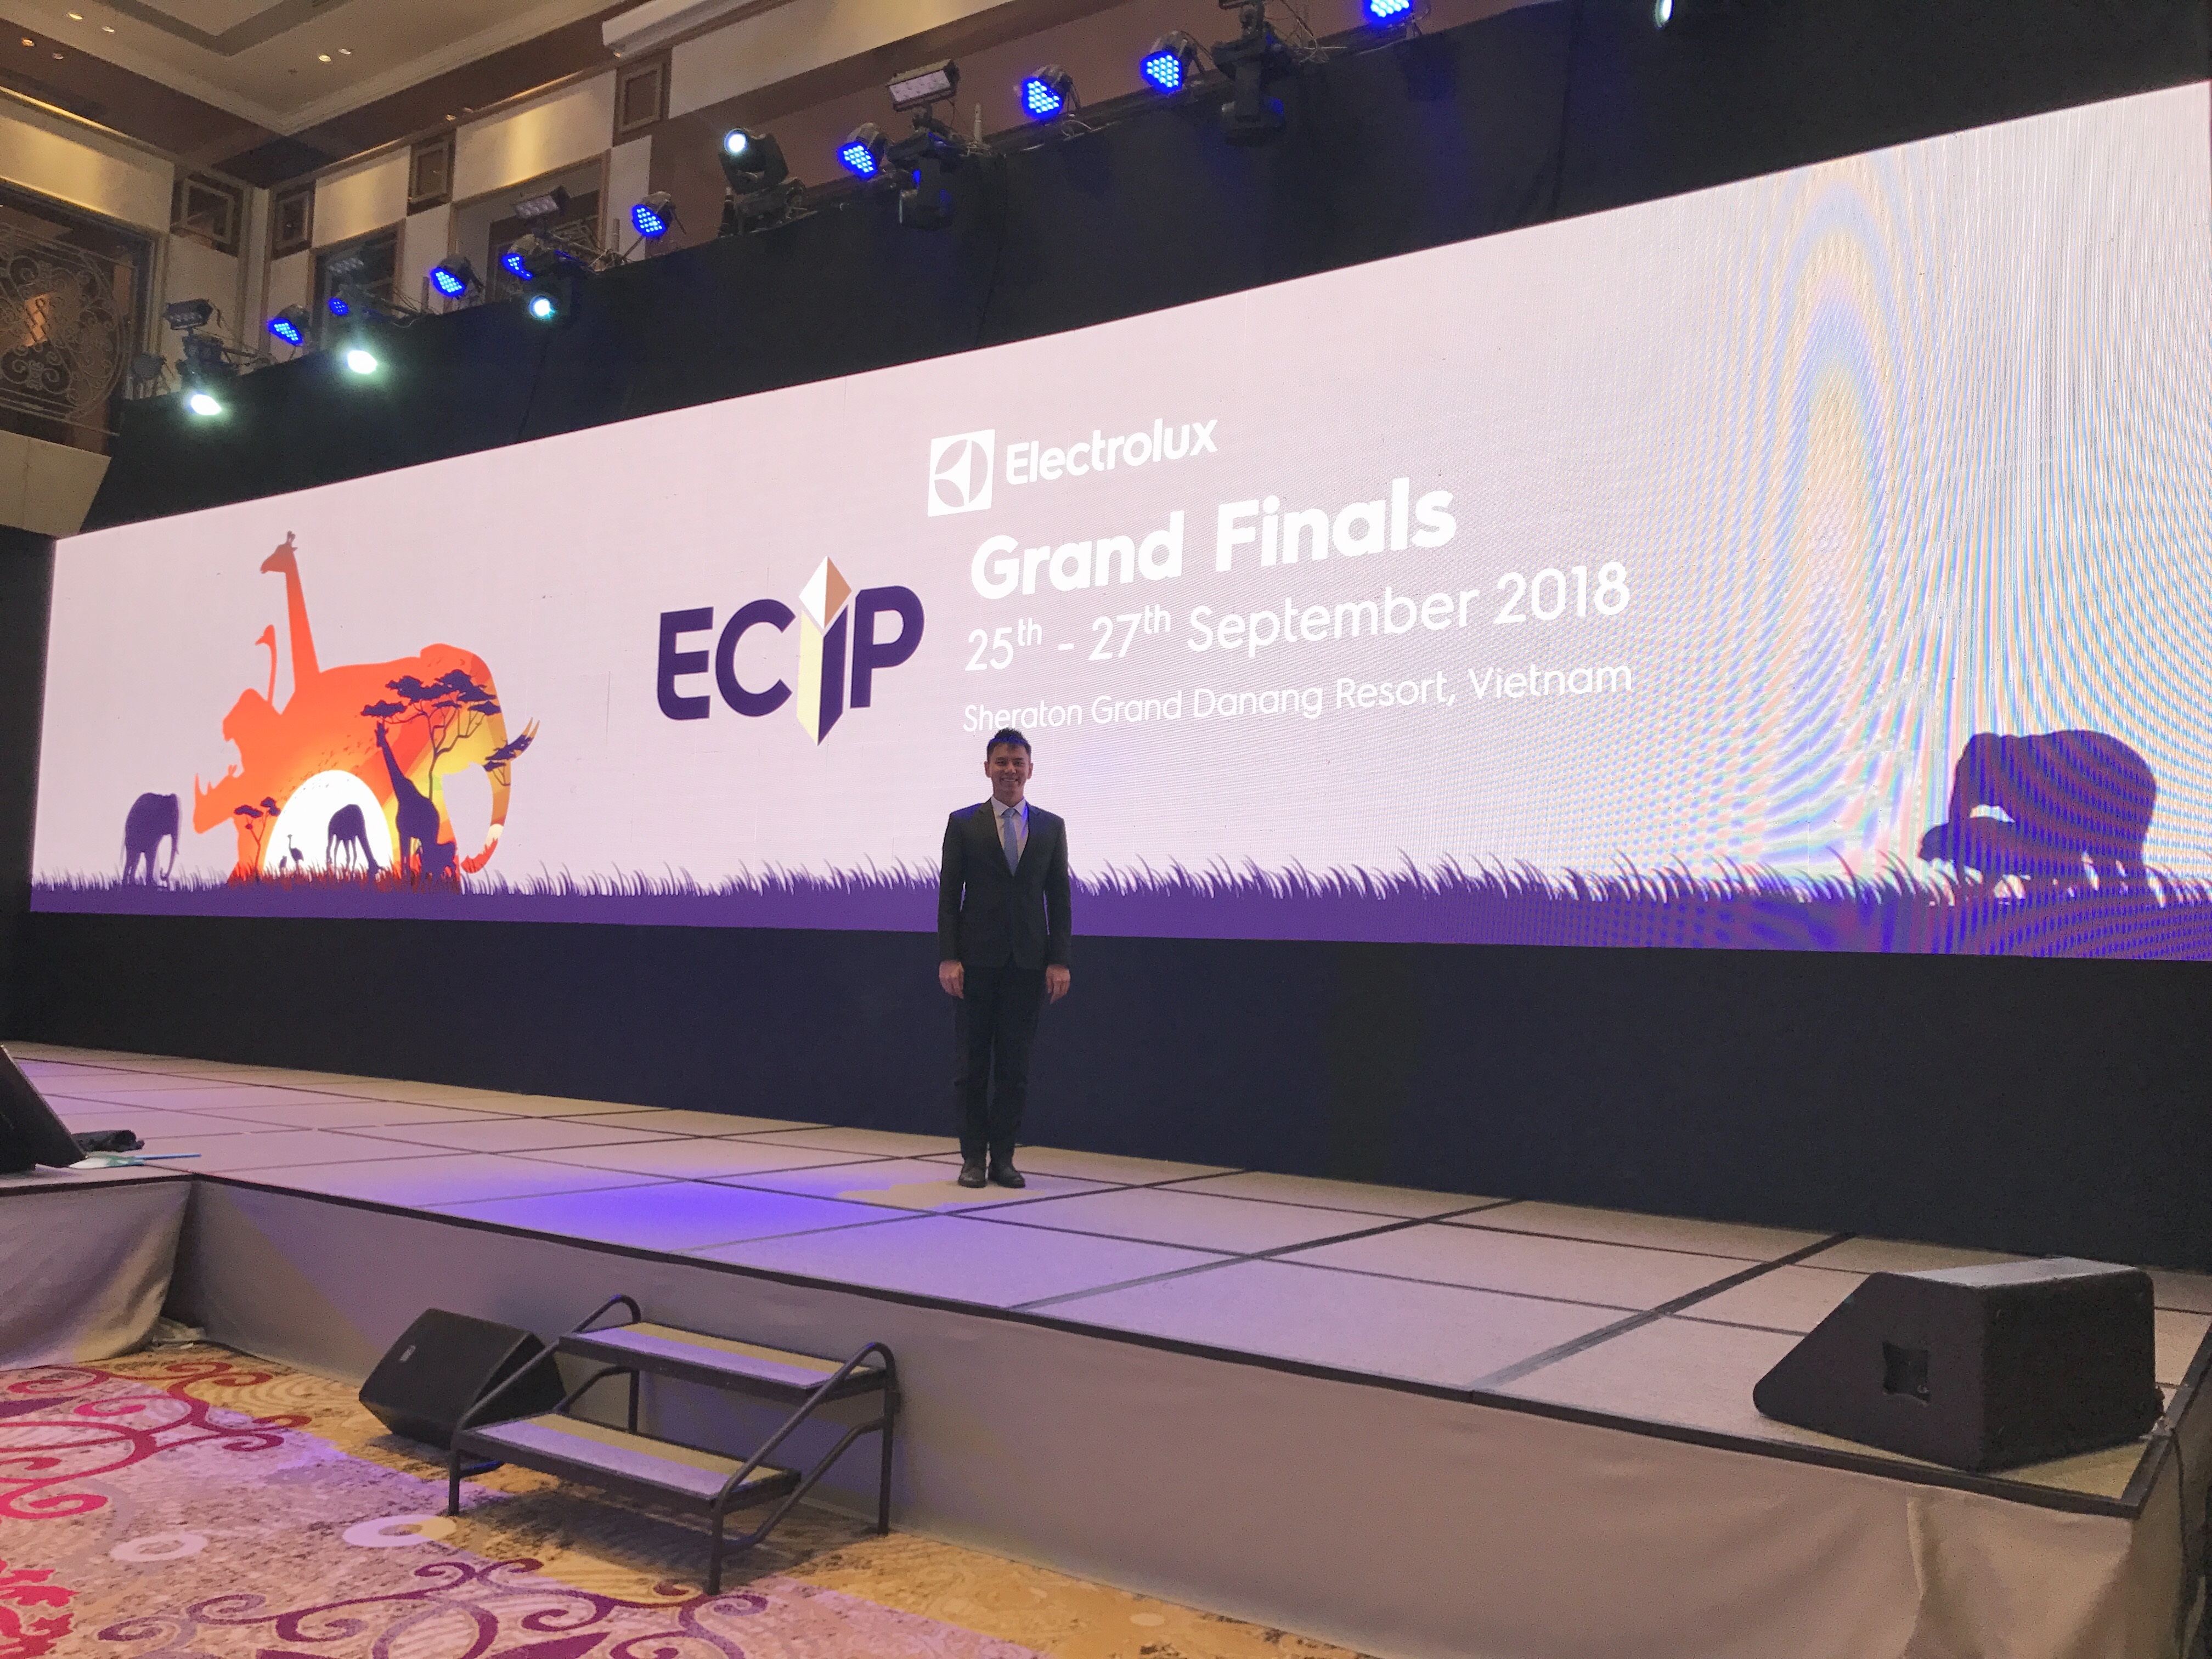 Electrolux grand finals in Da Nang Vietnam - overseas South east asia event emcee lester